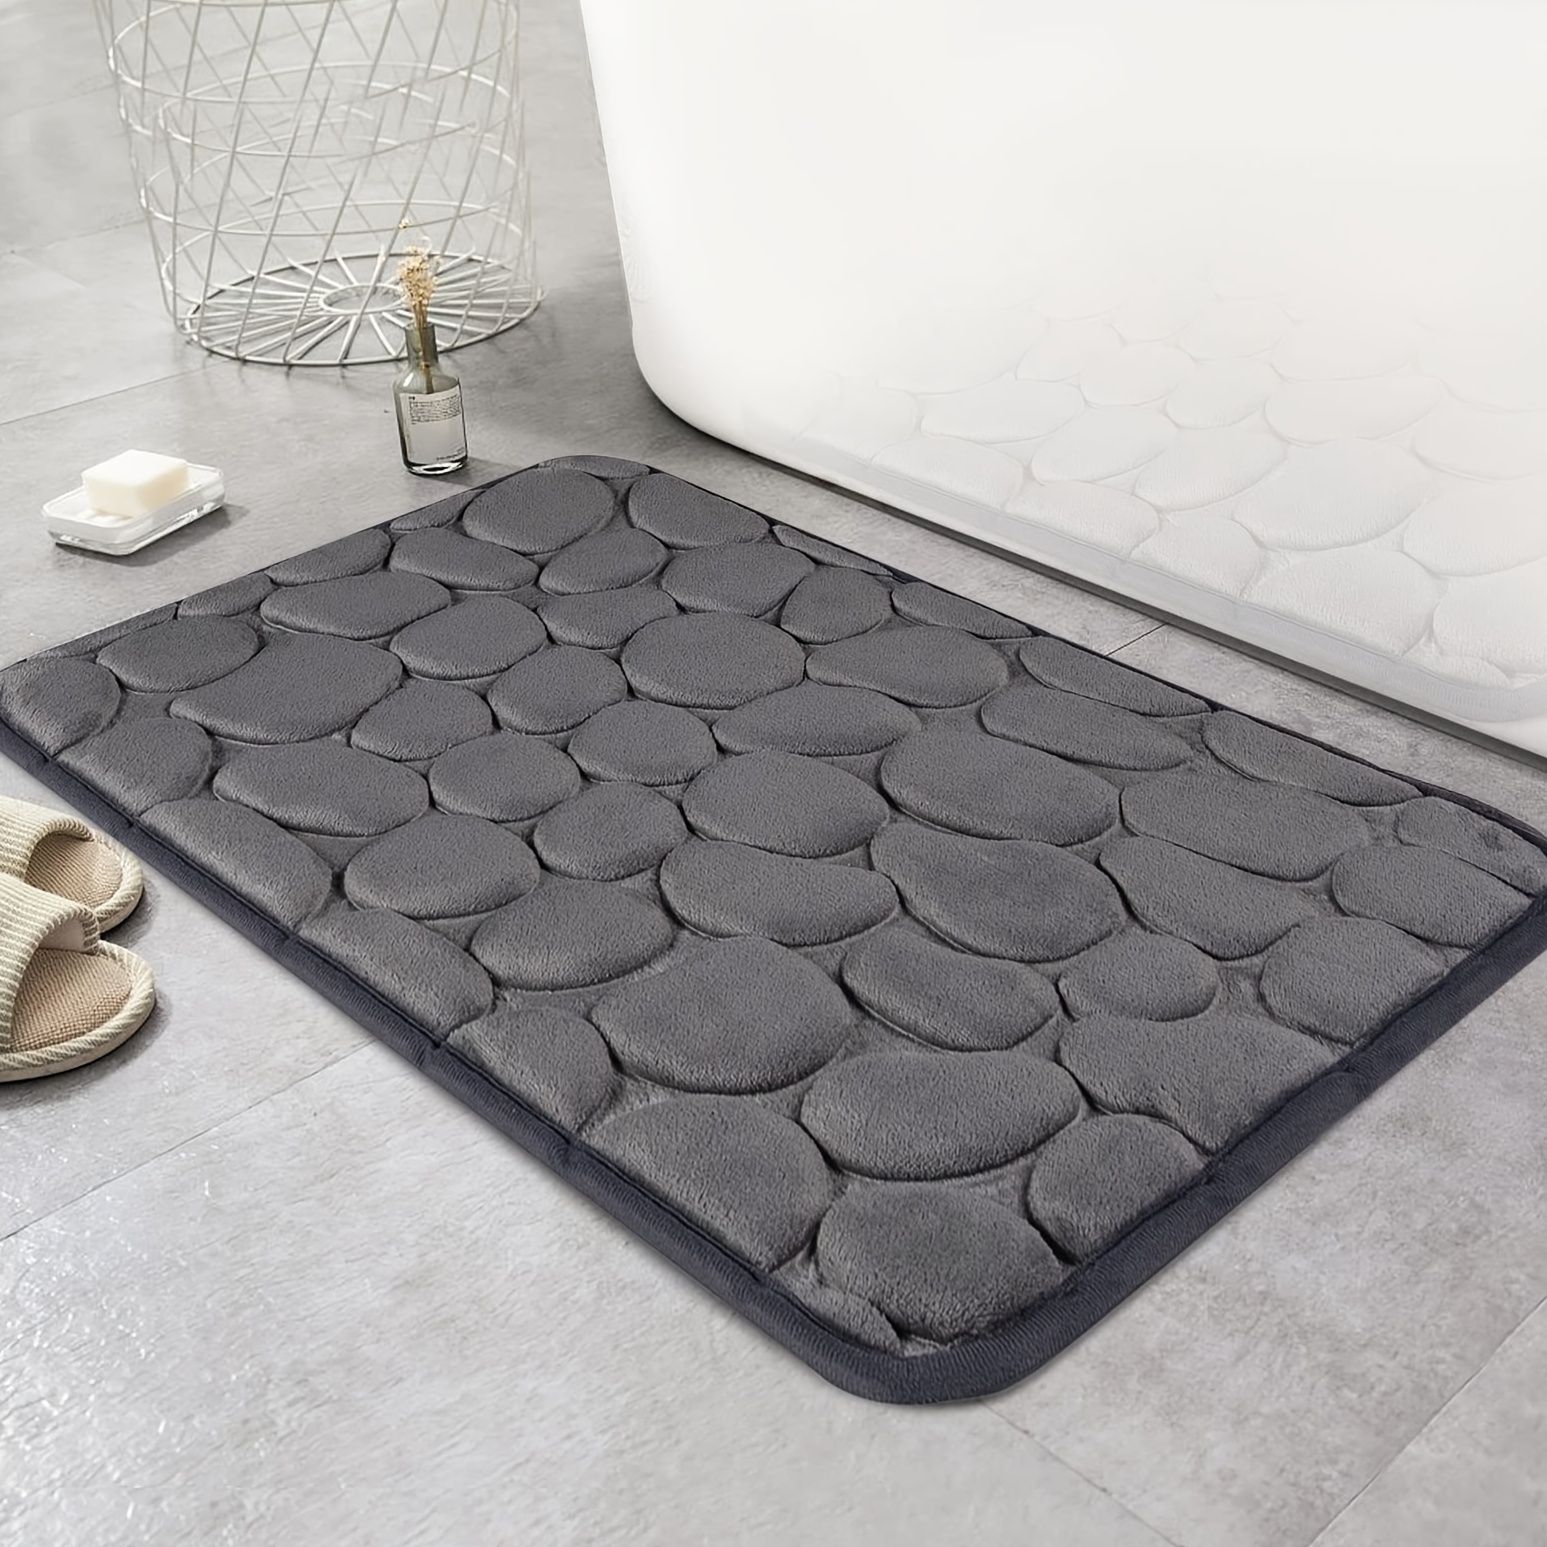 1pc Cobblestone Embossed Bathroom Bath Mat, Memory Foam Pad, Washable Bath  Rugs,Stone Textured Bath Rug, Rapid Water Absorbent, Non-Slip, Washable,  Thick, Soft And Comfortable Carpet For Shower Room